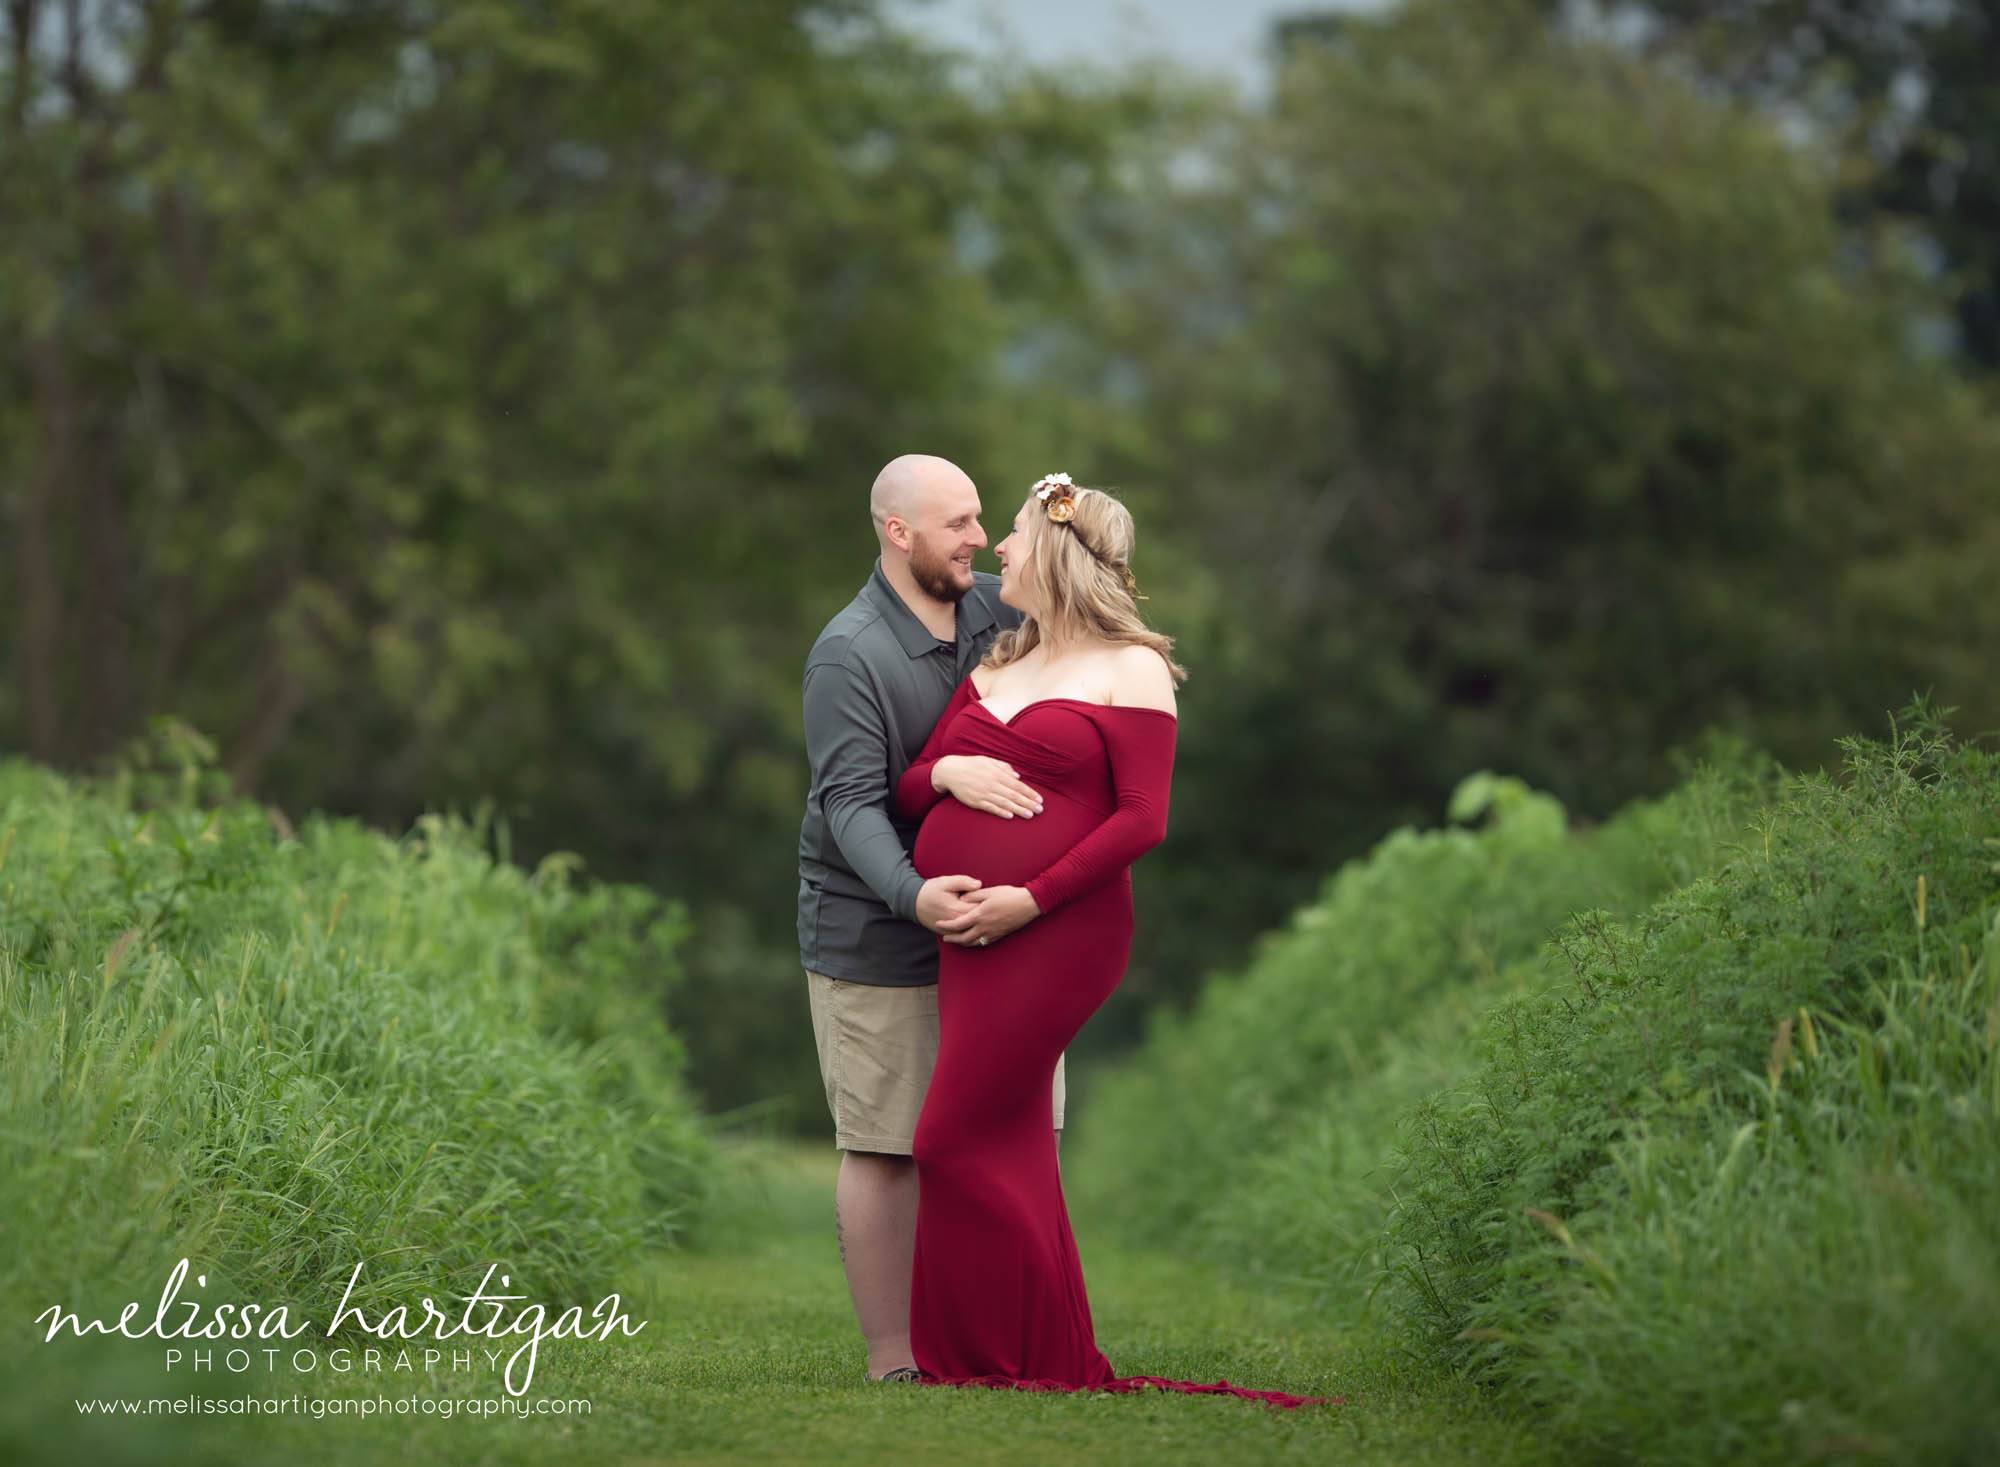 Expectant couple looking at each other and smiling while embracing and holding baby bump Columbia CT maternity photographers